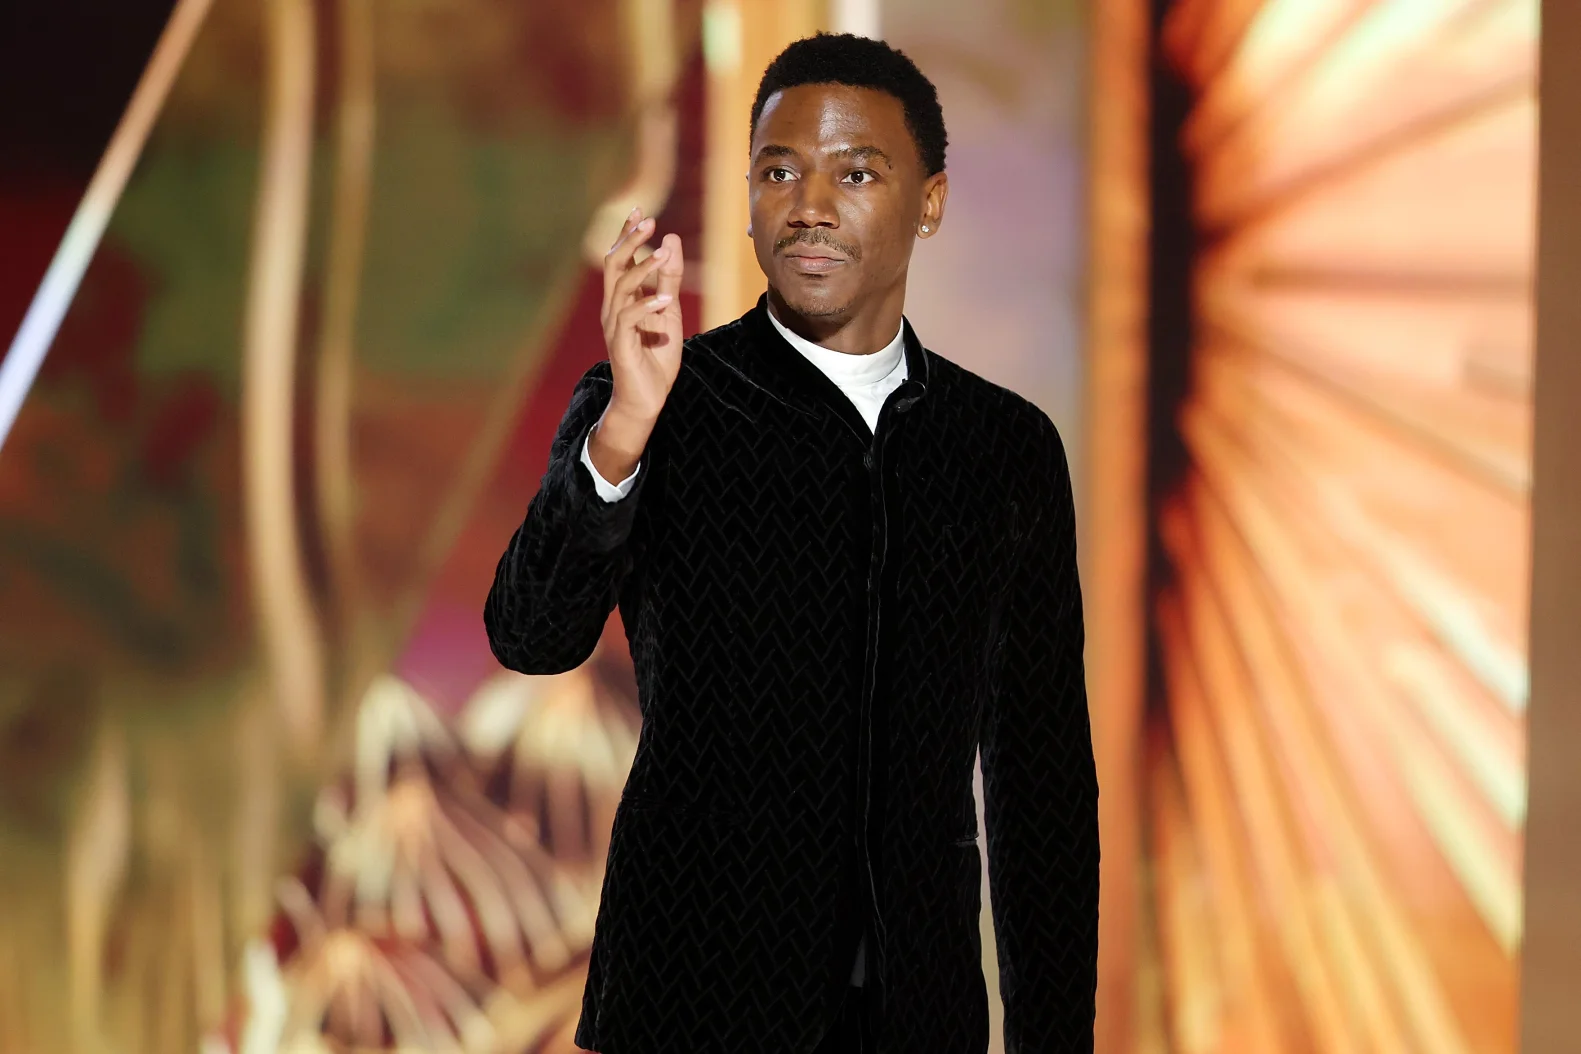 Jerrod Carmichael throws shade at Golden Globes during opening monologue